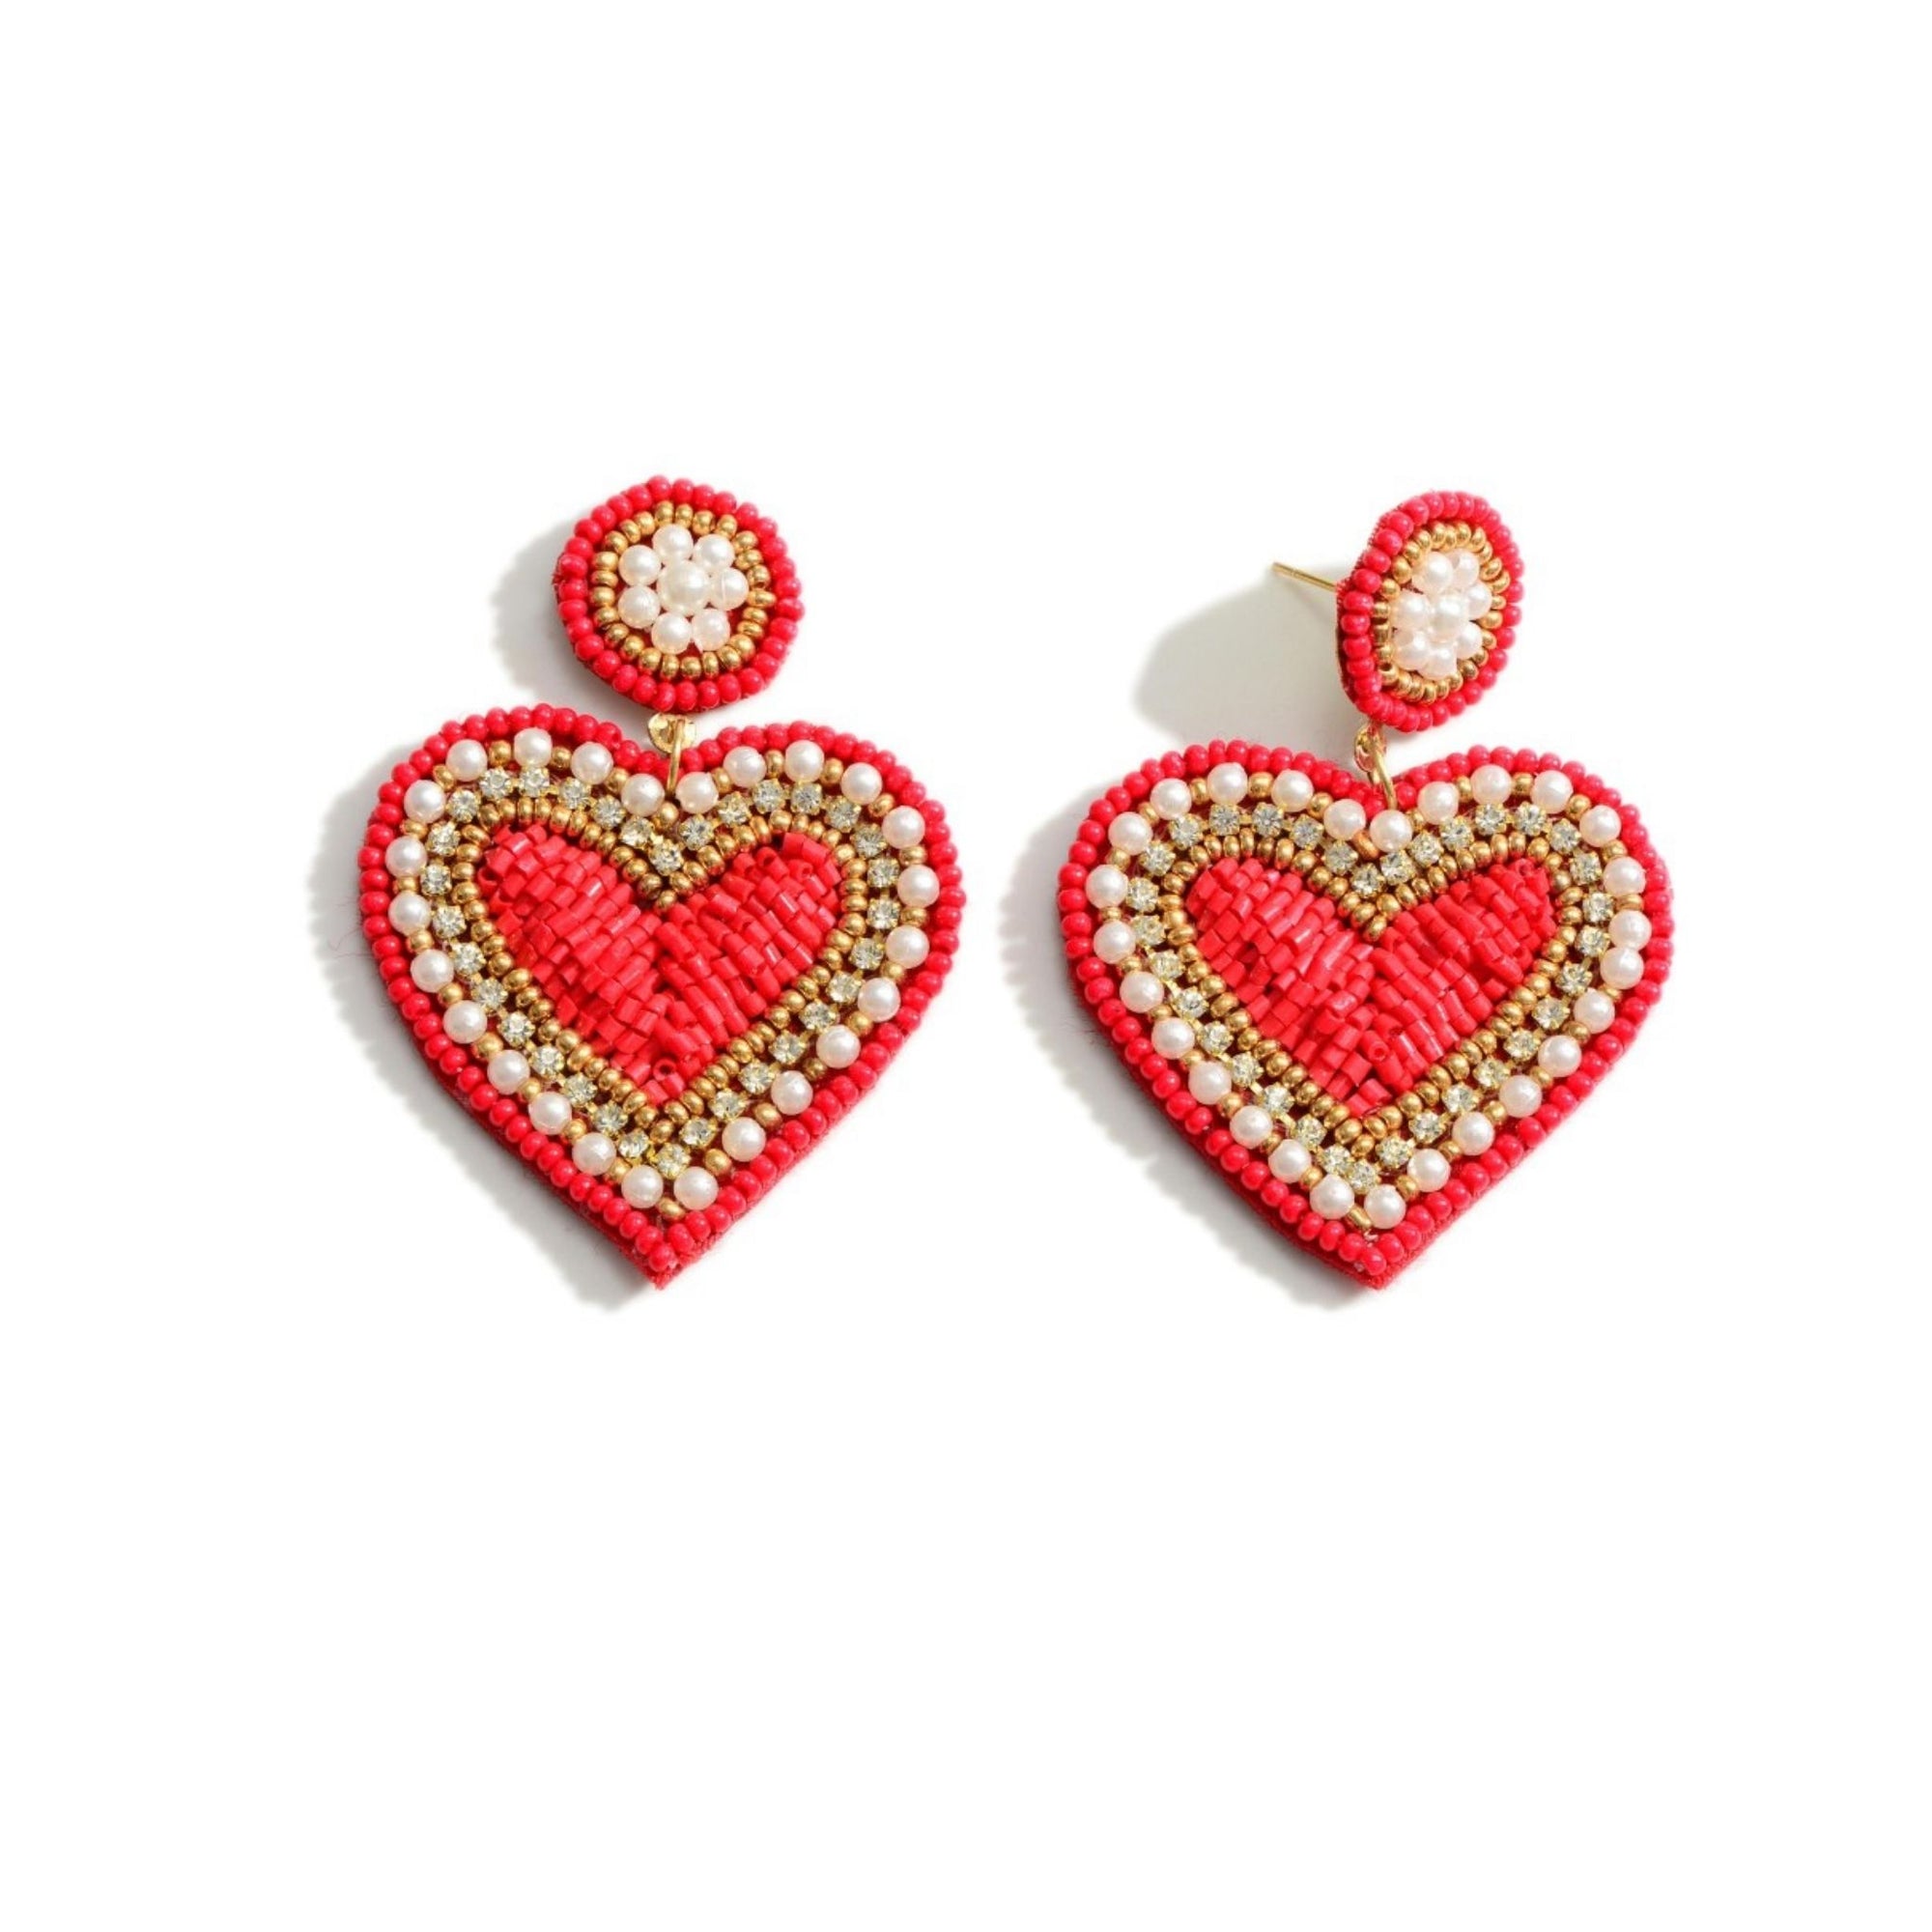 Seed Bead Heart Drop Earrings with Pearl Accents